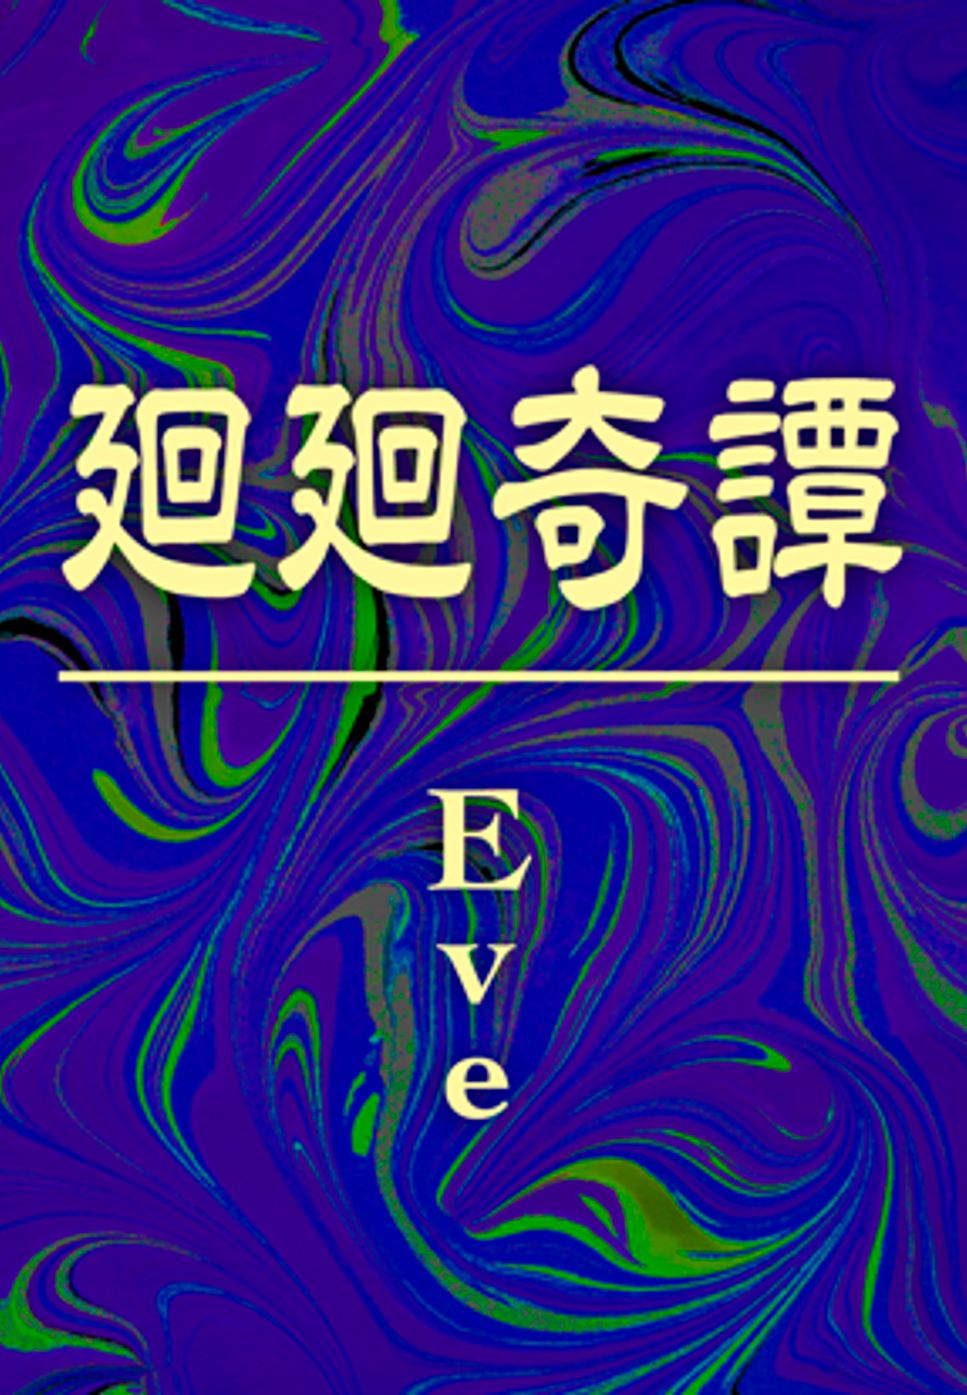 Eve - 廻廻奇譚 (『呪術廻戦』 OPテーマ) by DSU